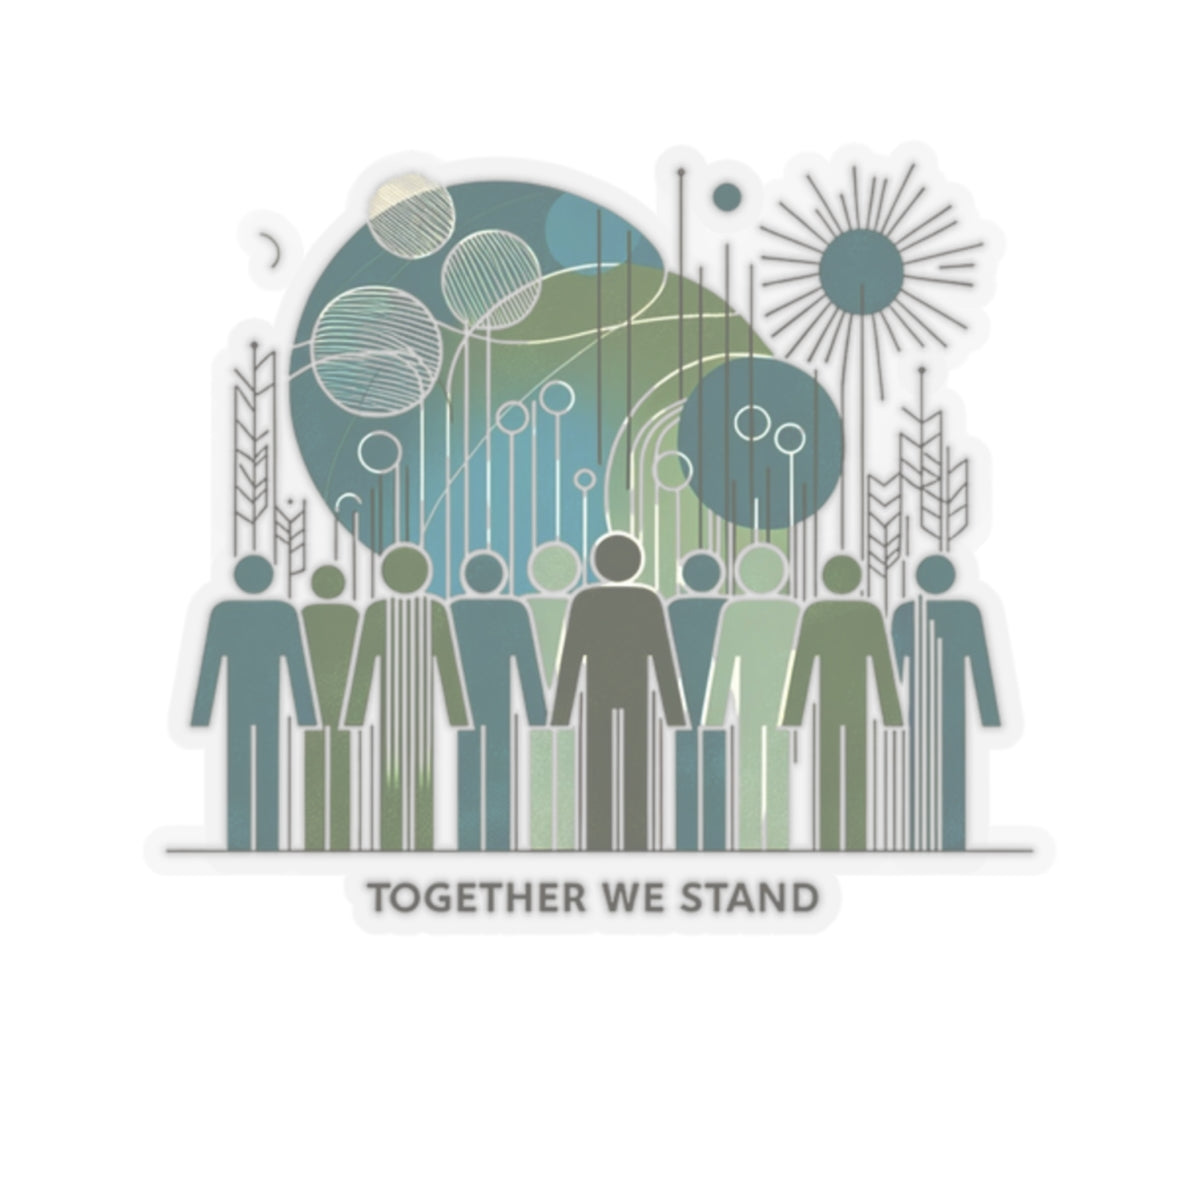 Together We Stand Stickers